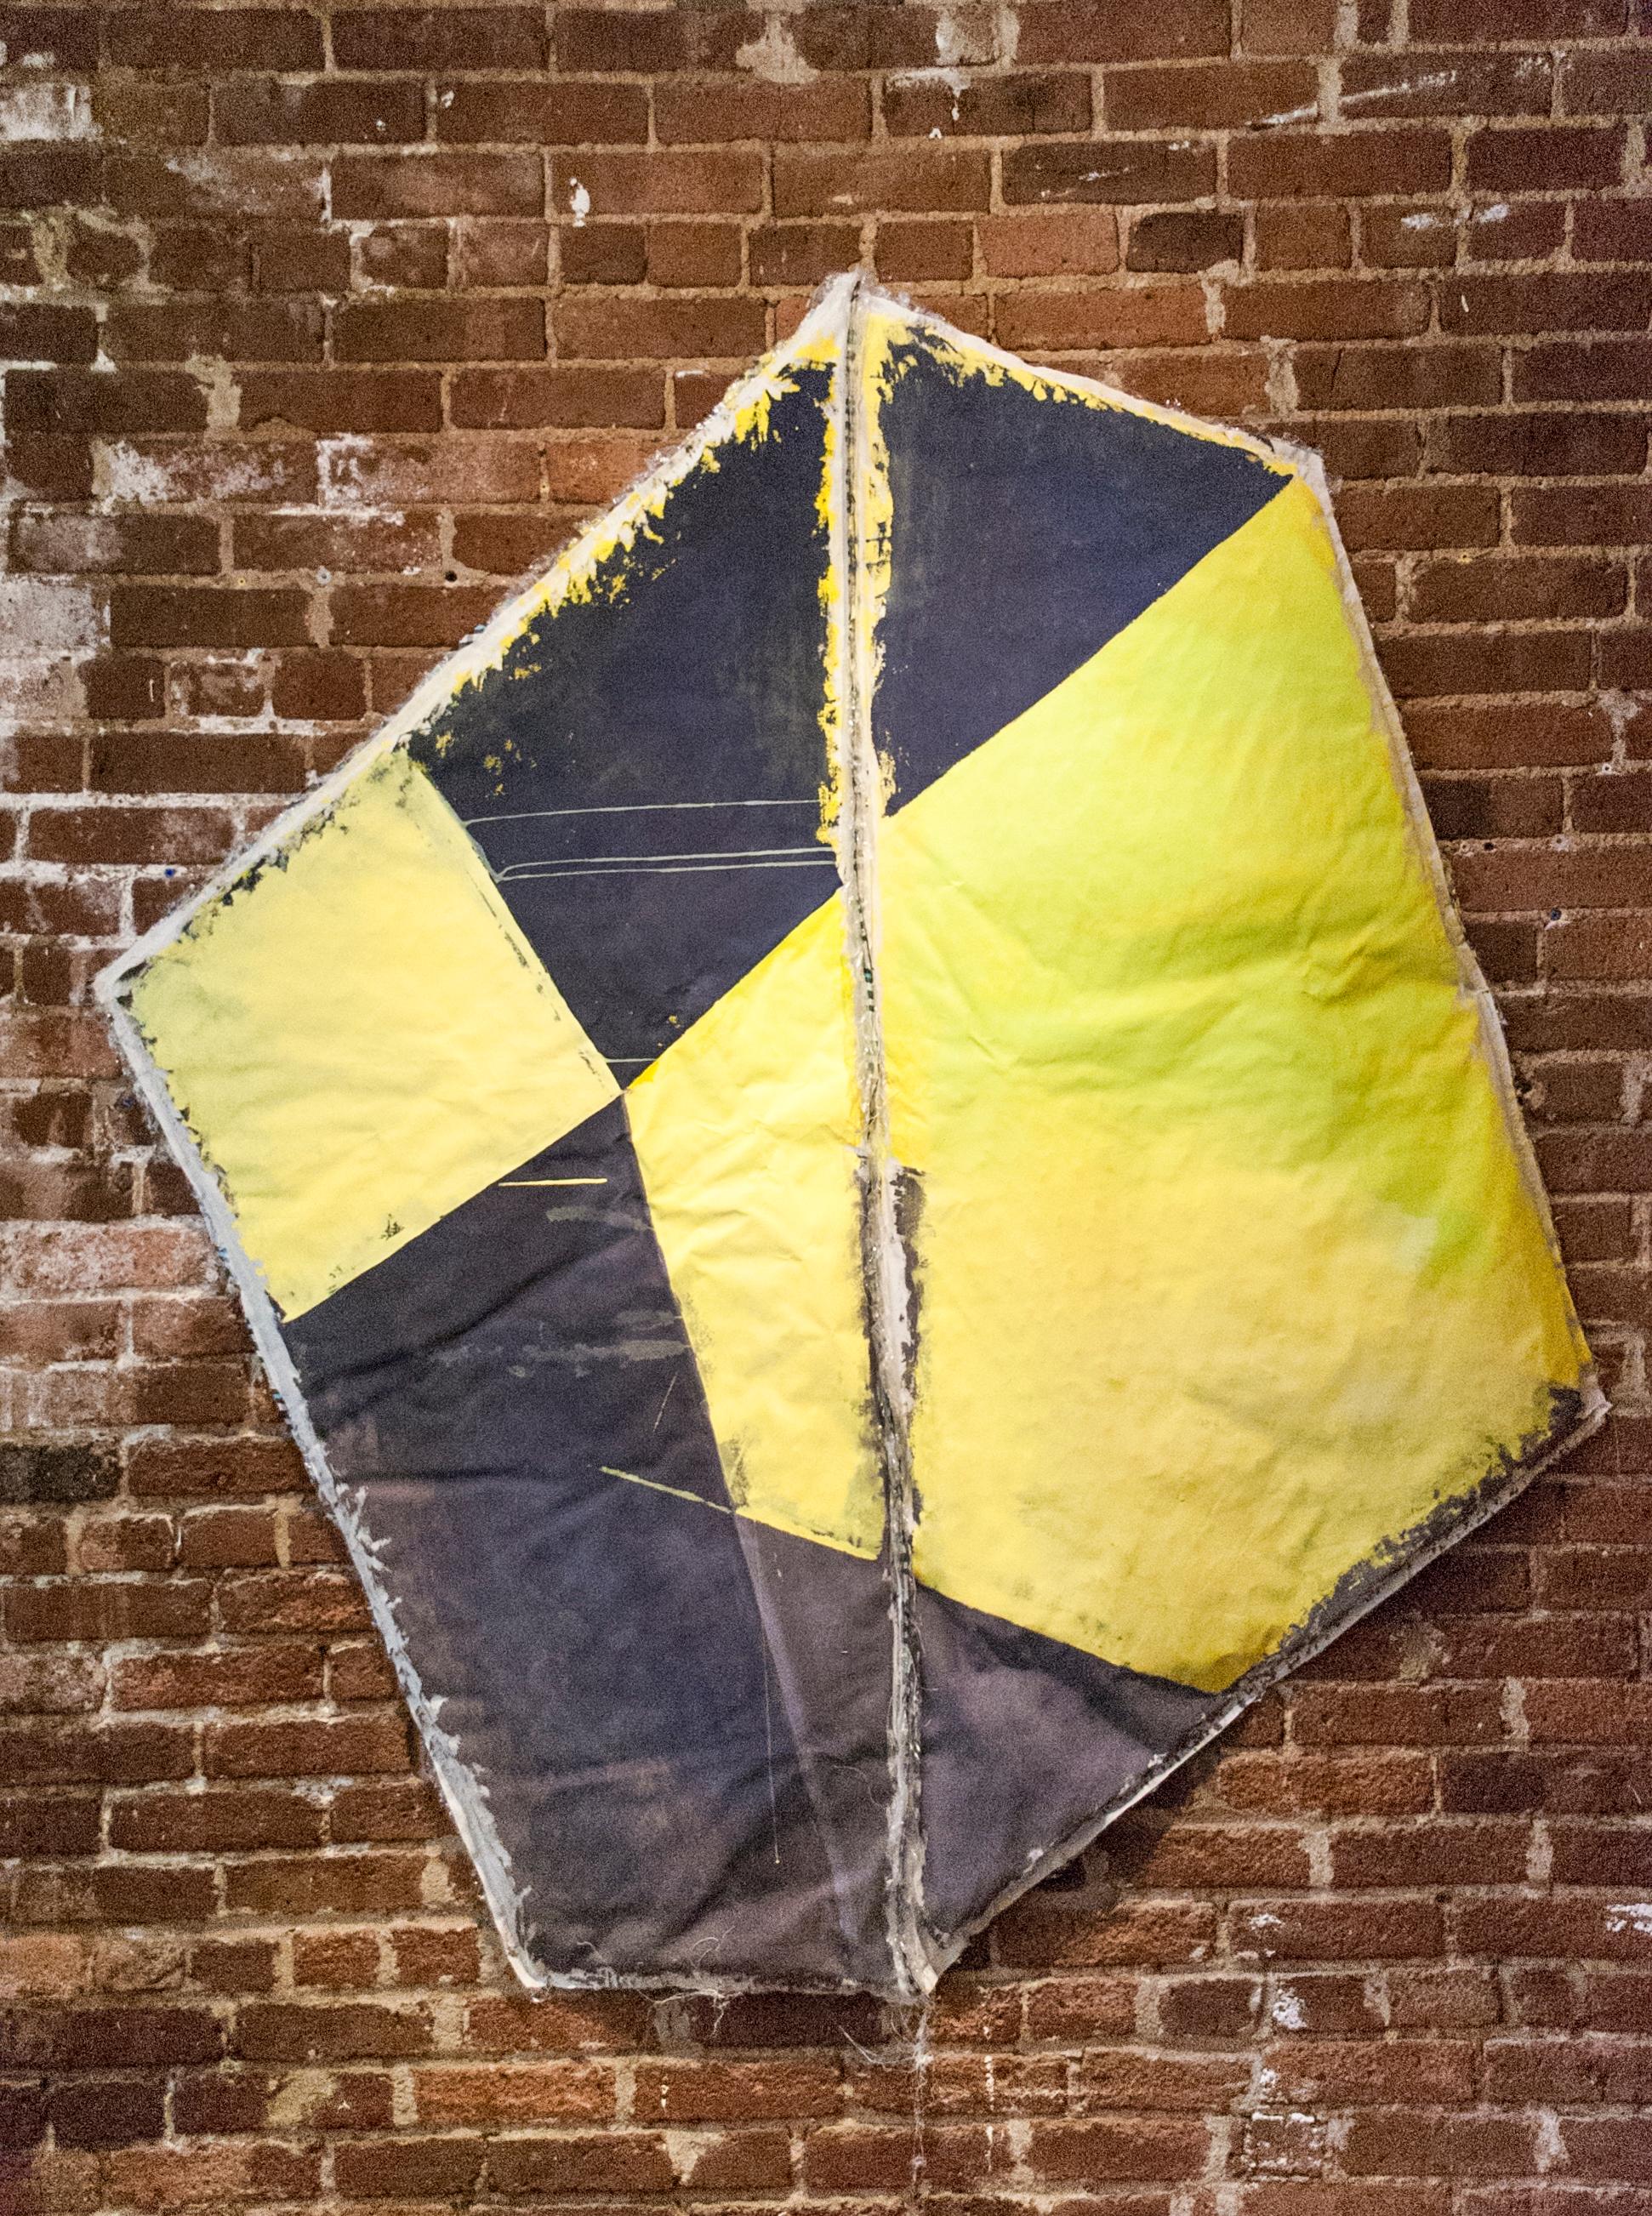 Drifter, black and yellow geometric abstract painting on muslin - Painting by Lizzie Scott